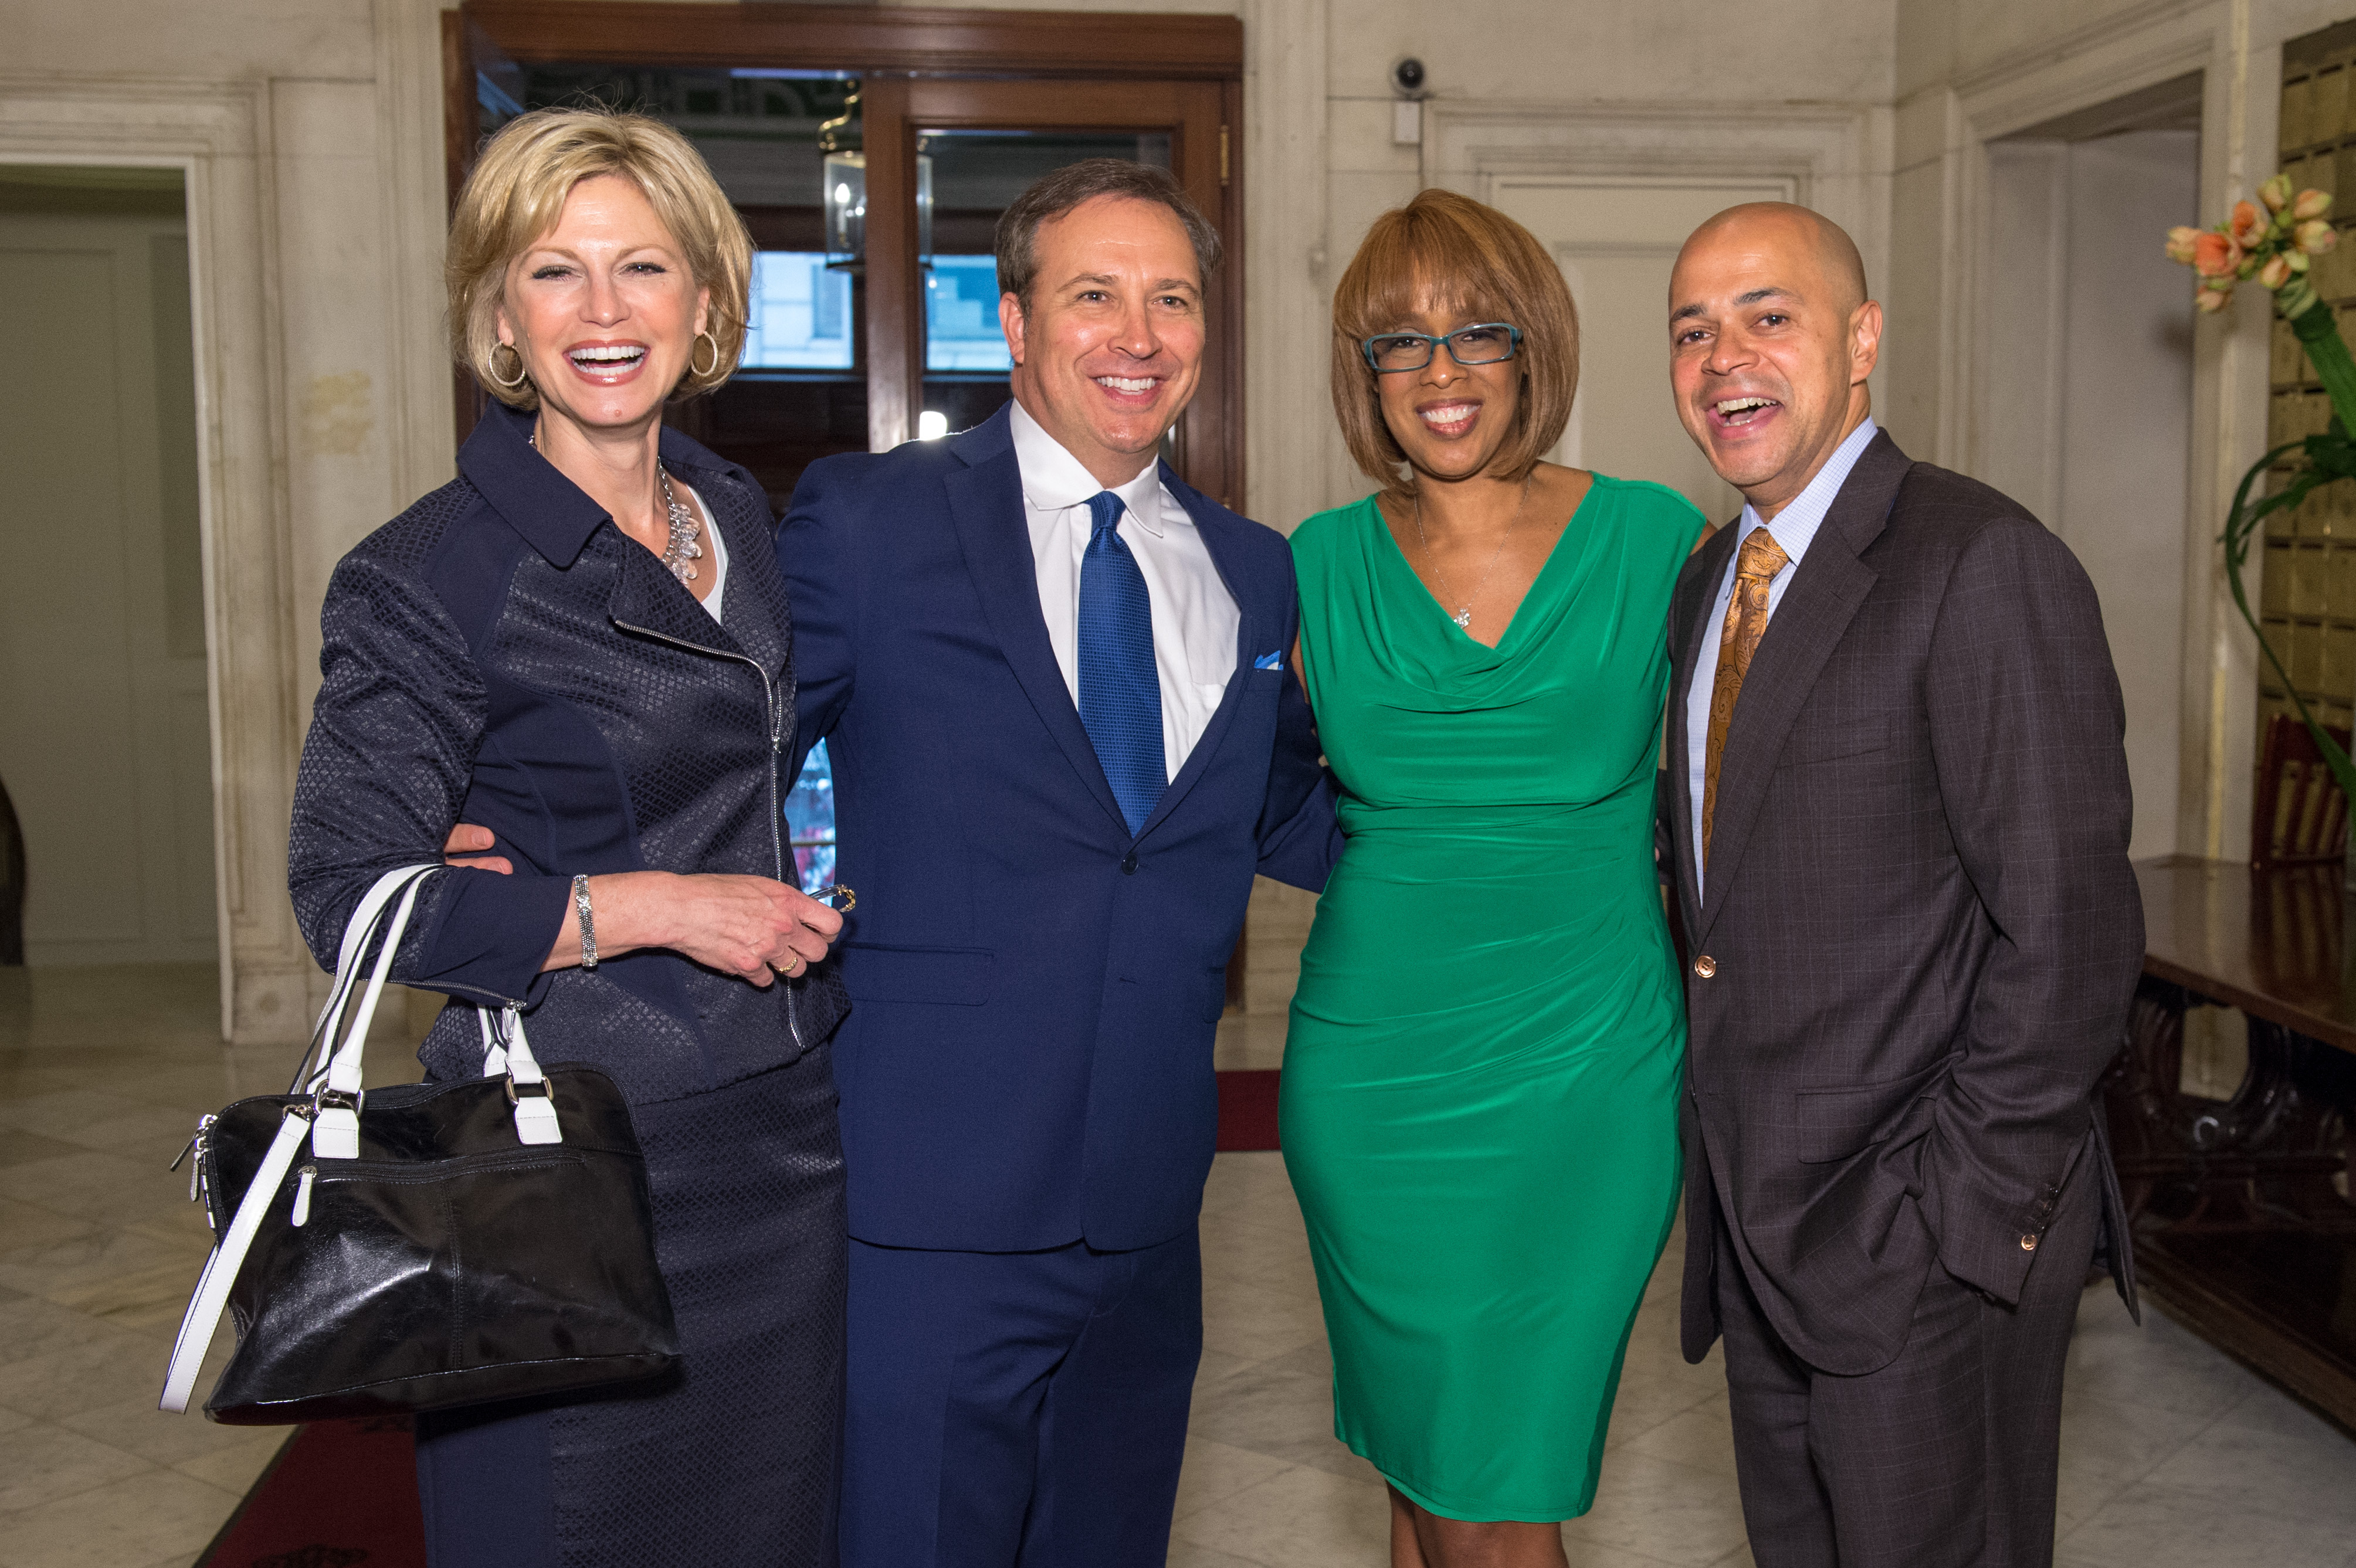 Current and past WFSBers Denise D'Ascenzo, Dennis House, Gayle King and David Ushery